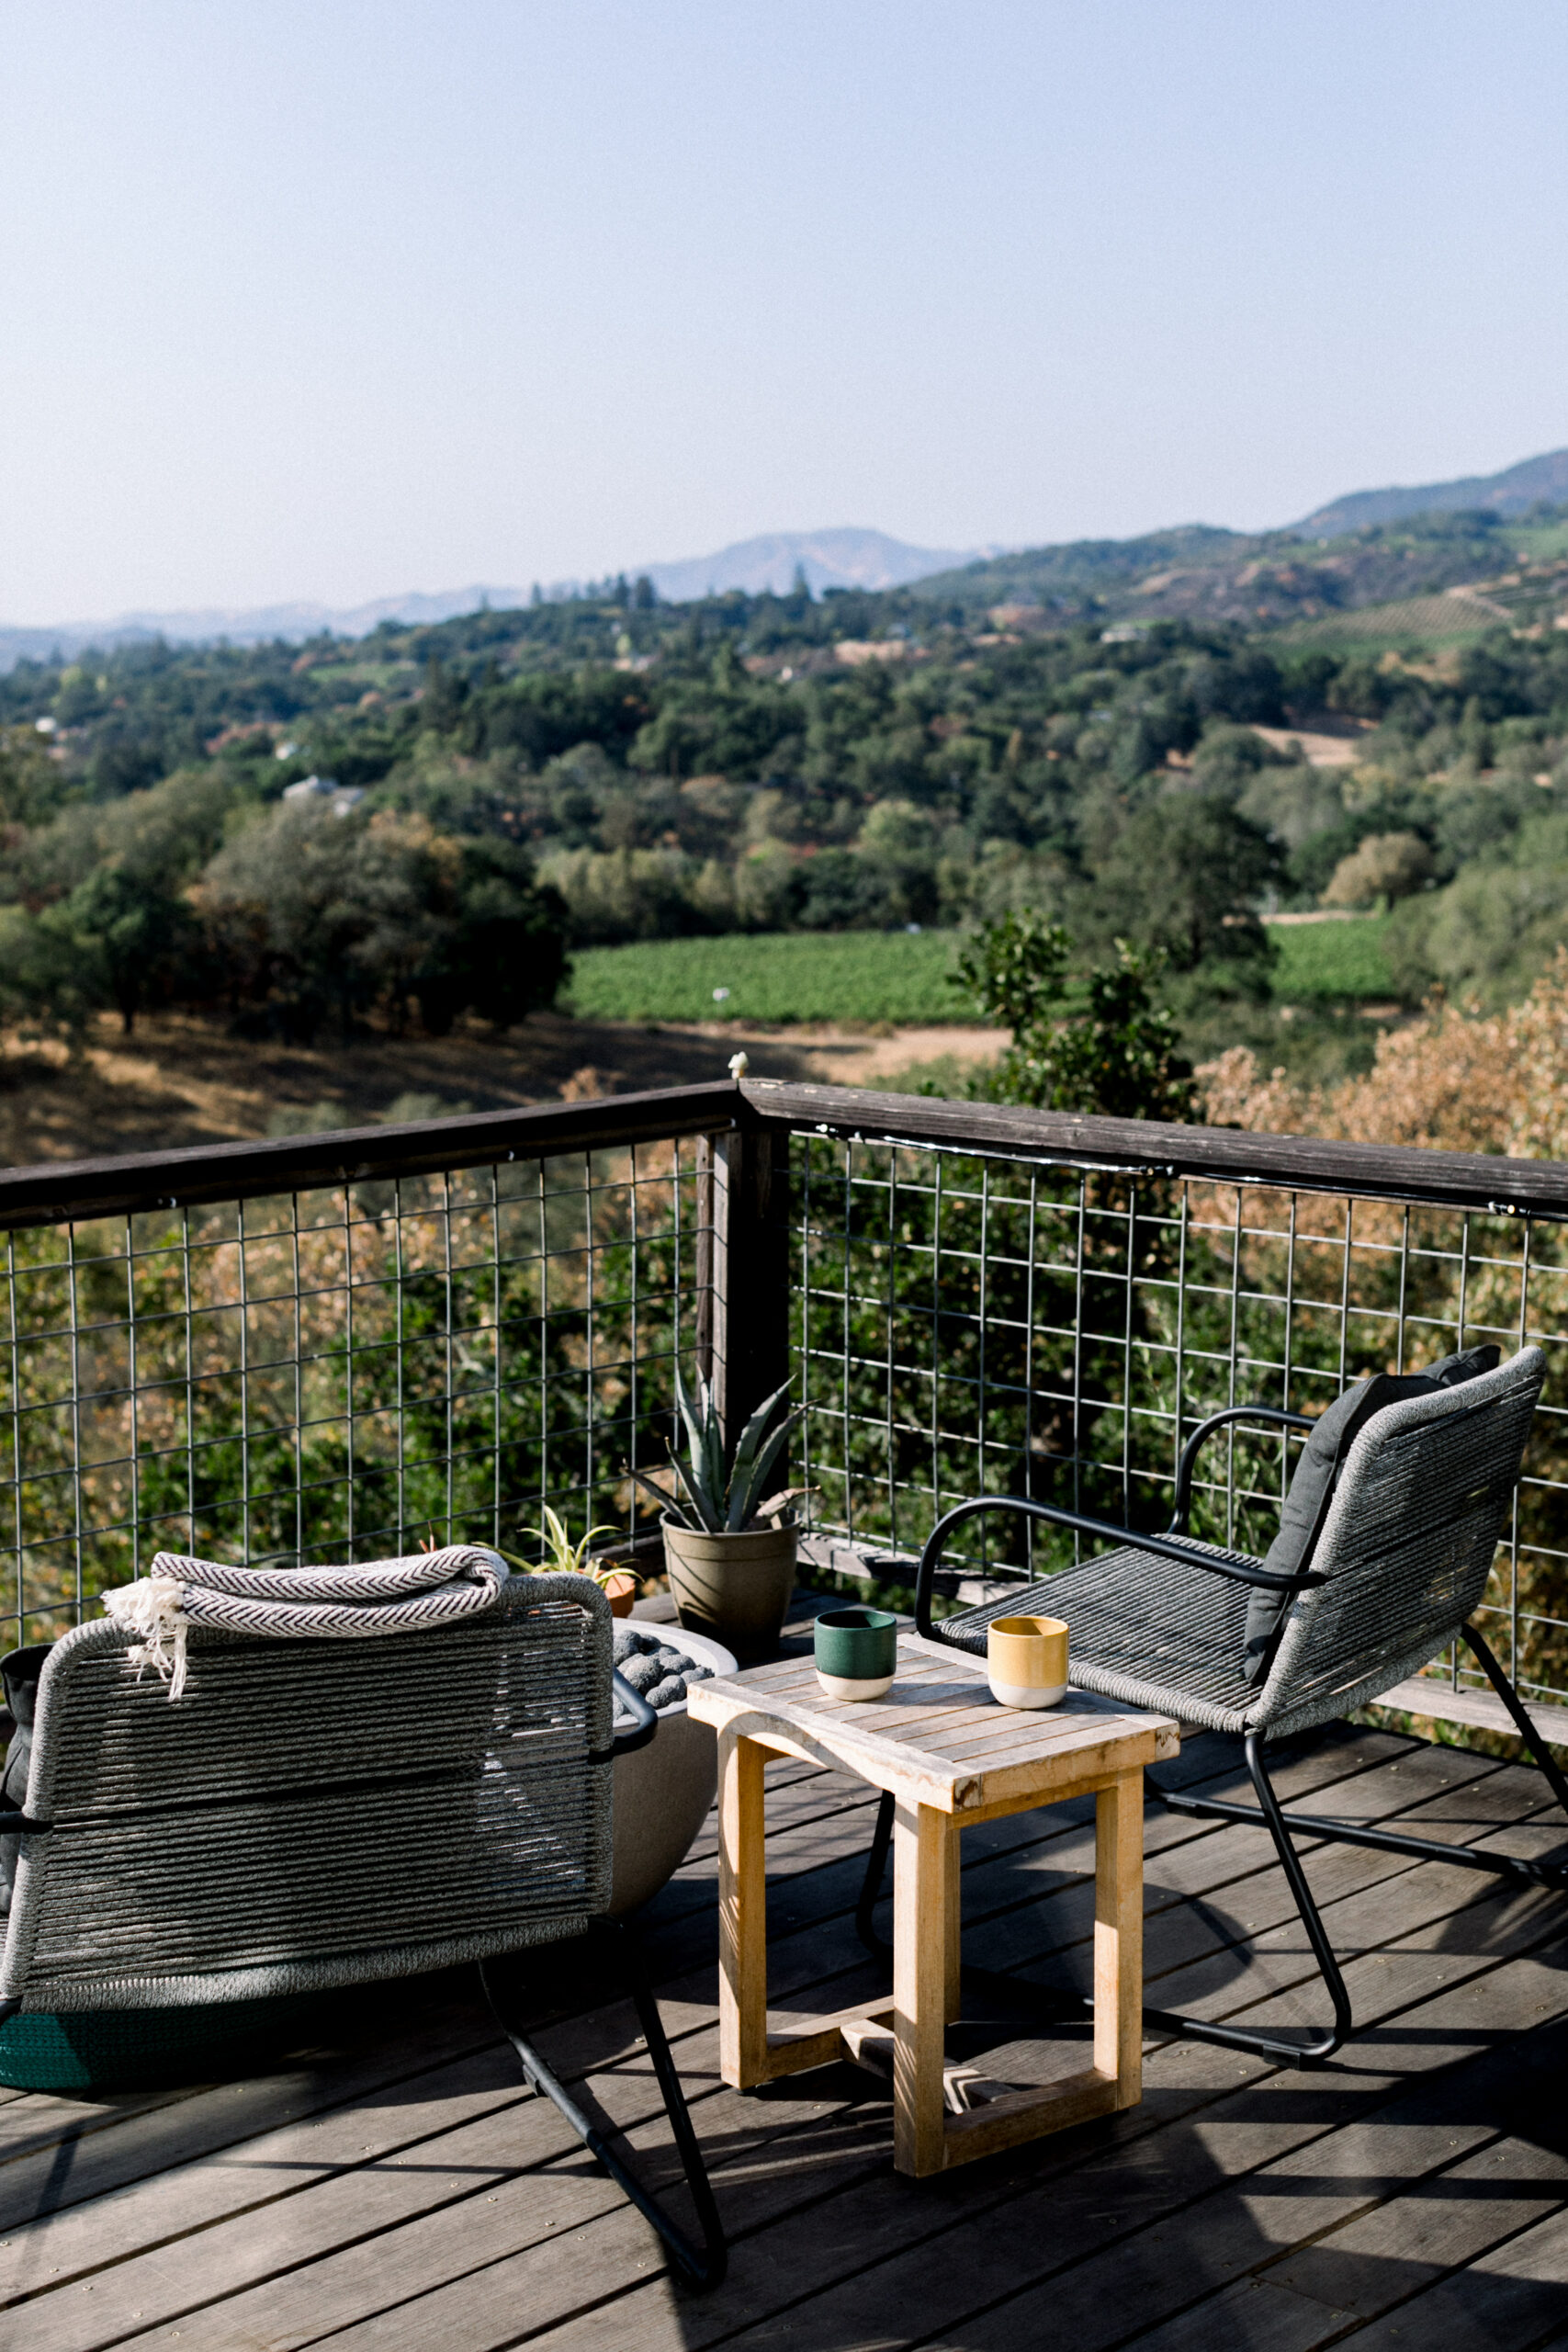 View from the deck. (Eileen Roche/for Sonoma Magazine)